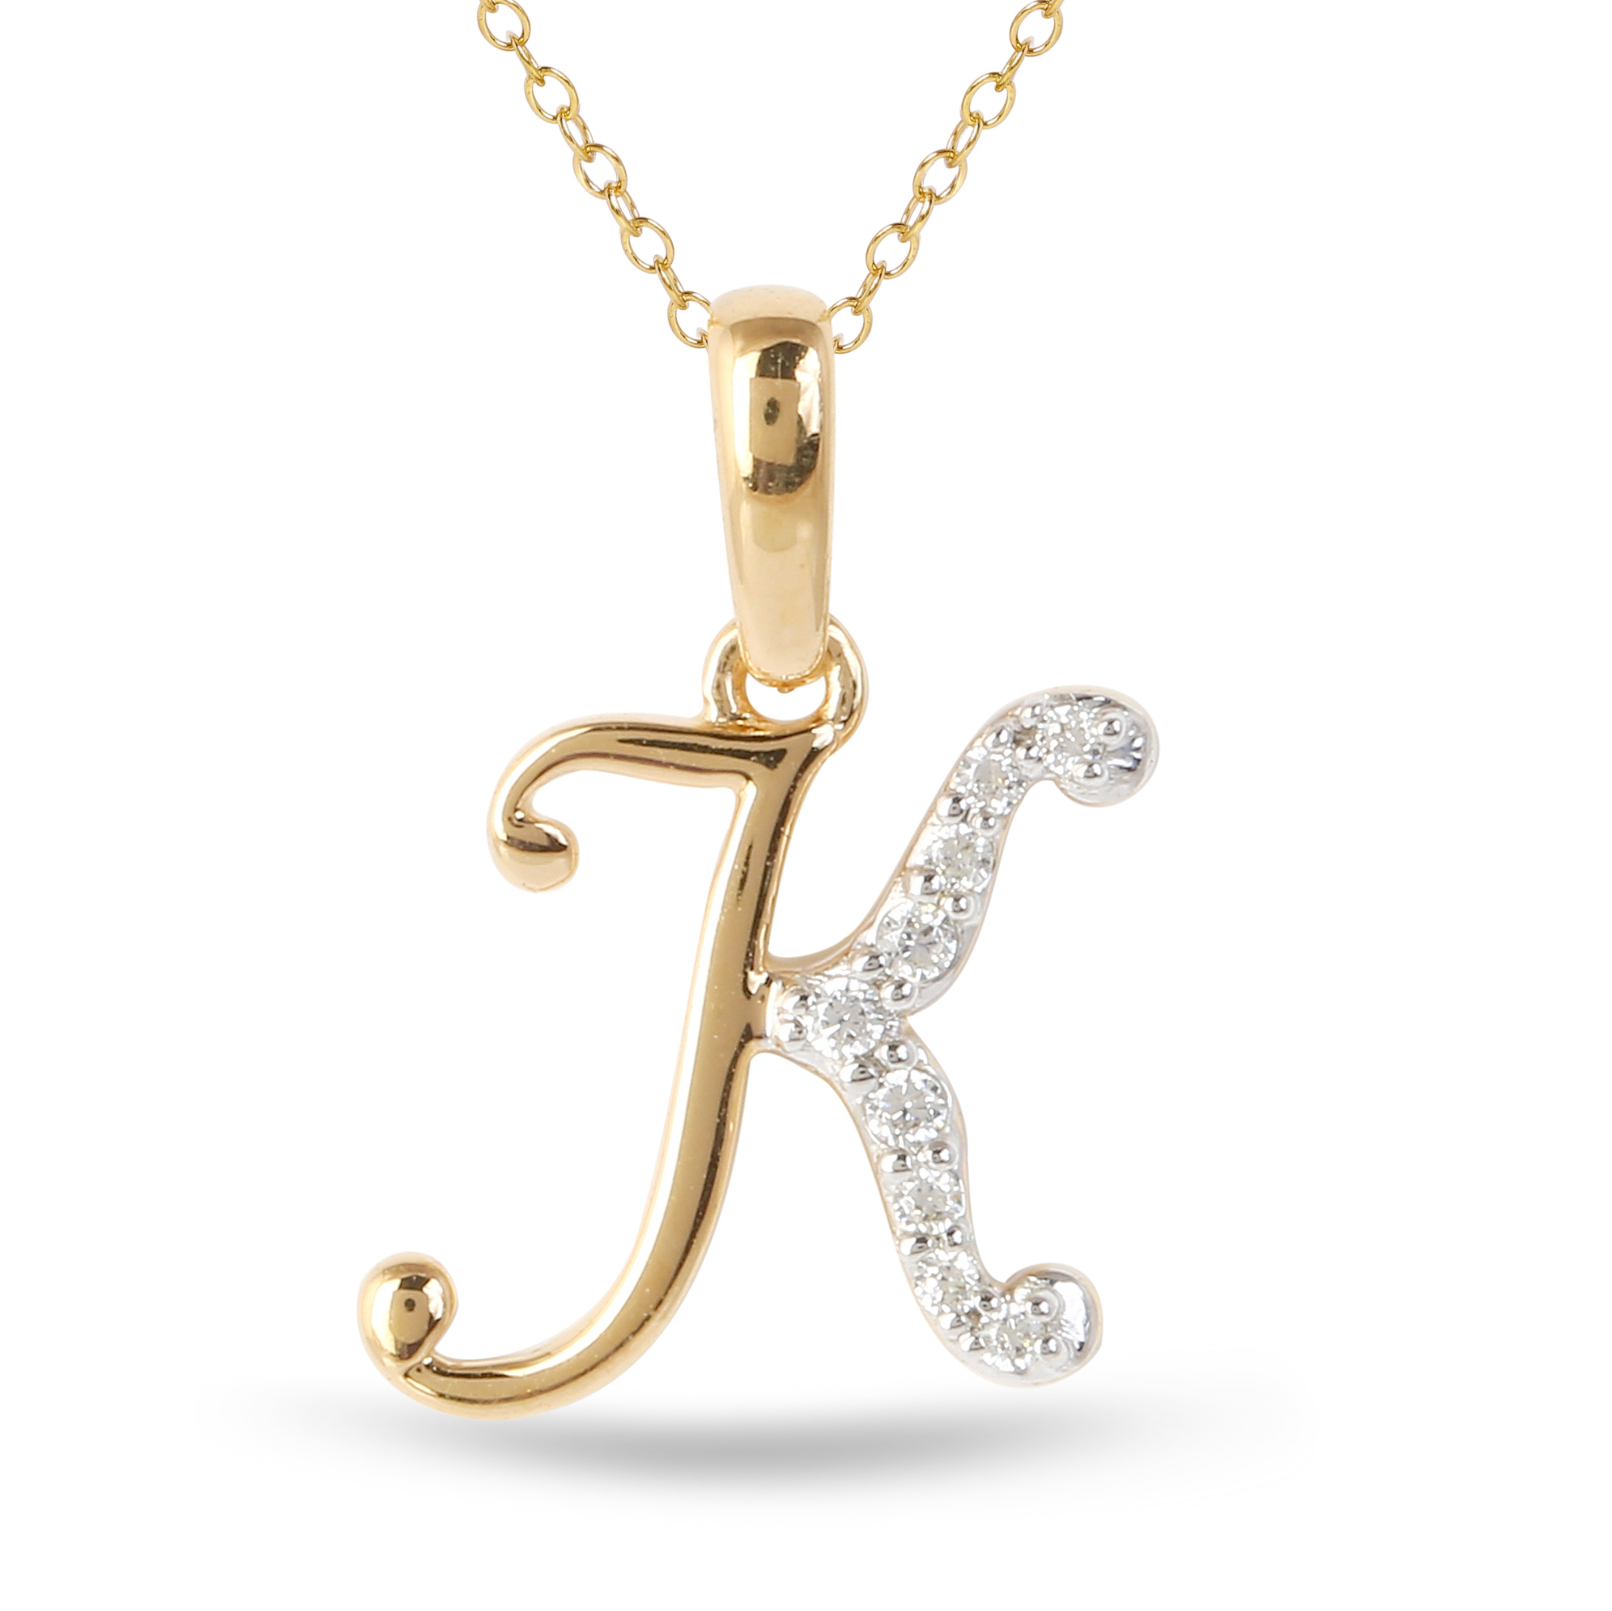 Amouria 1/20Ct TDW Diamond Alphabet K Pendant Necklace in Yellow Gold Plated Sterling Silver (H-I, I2)